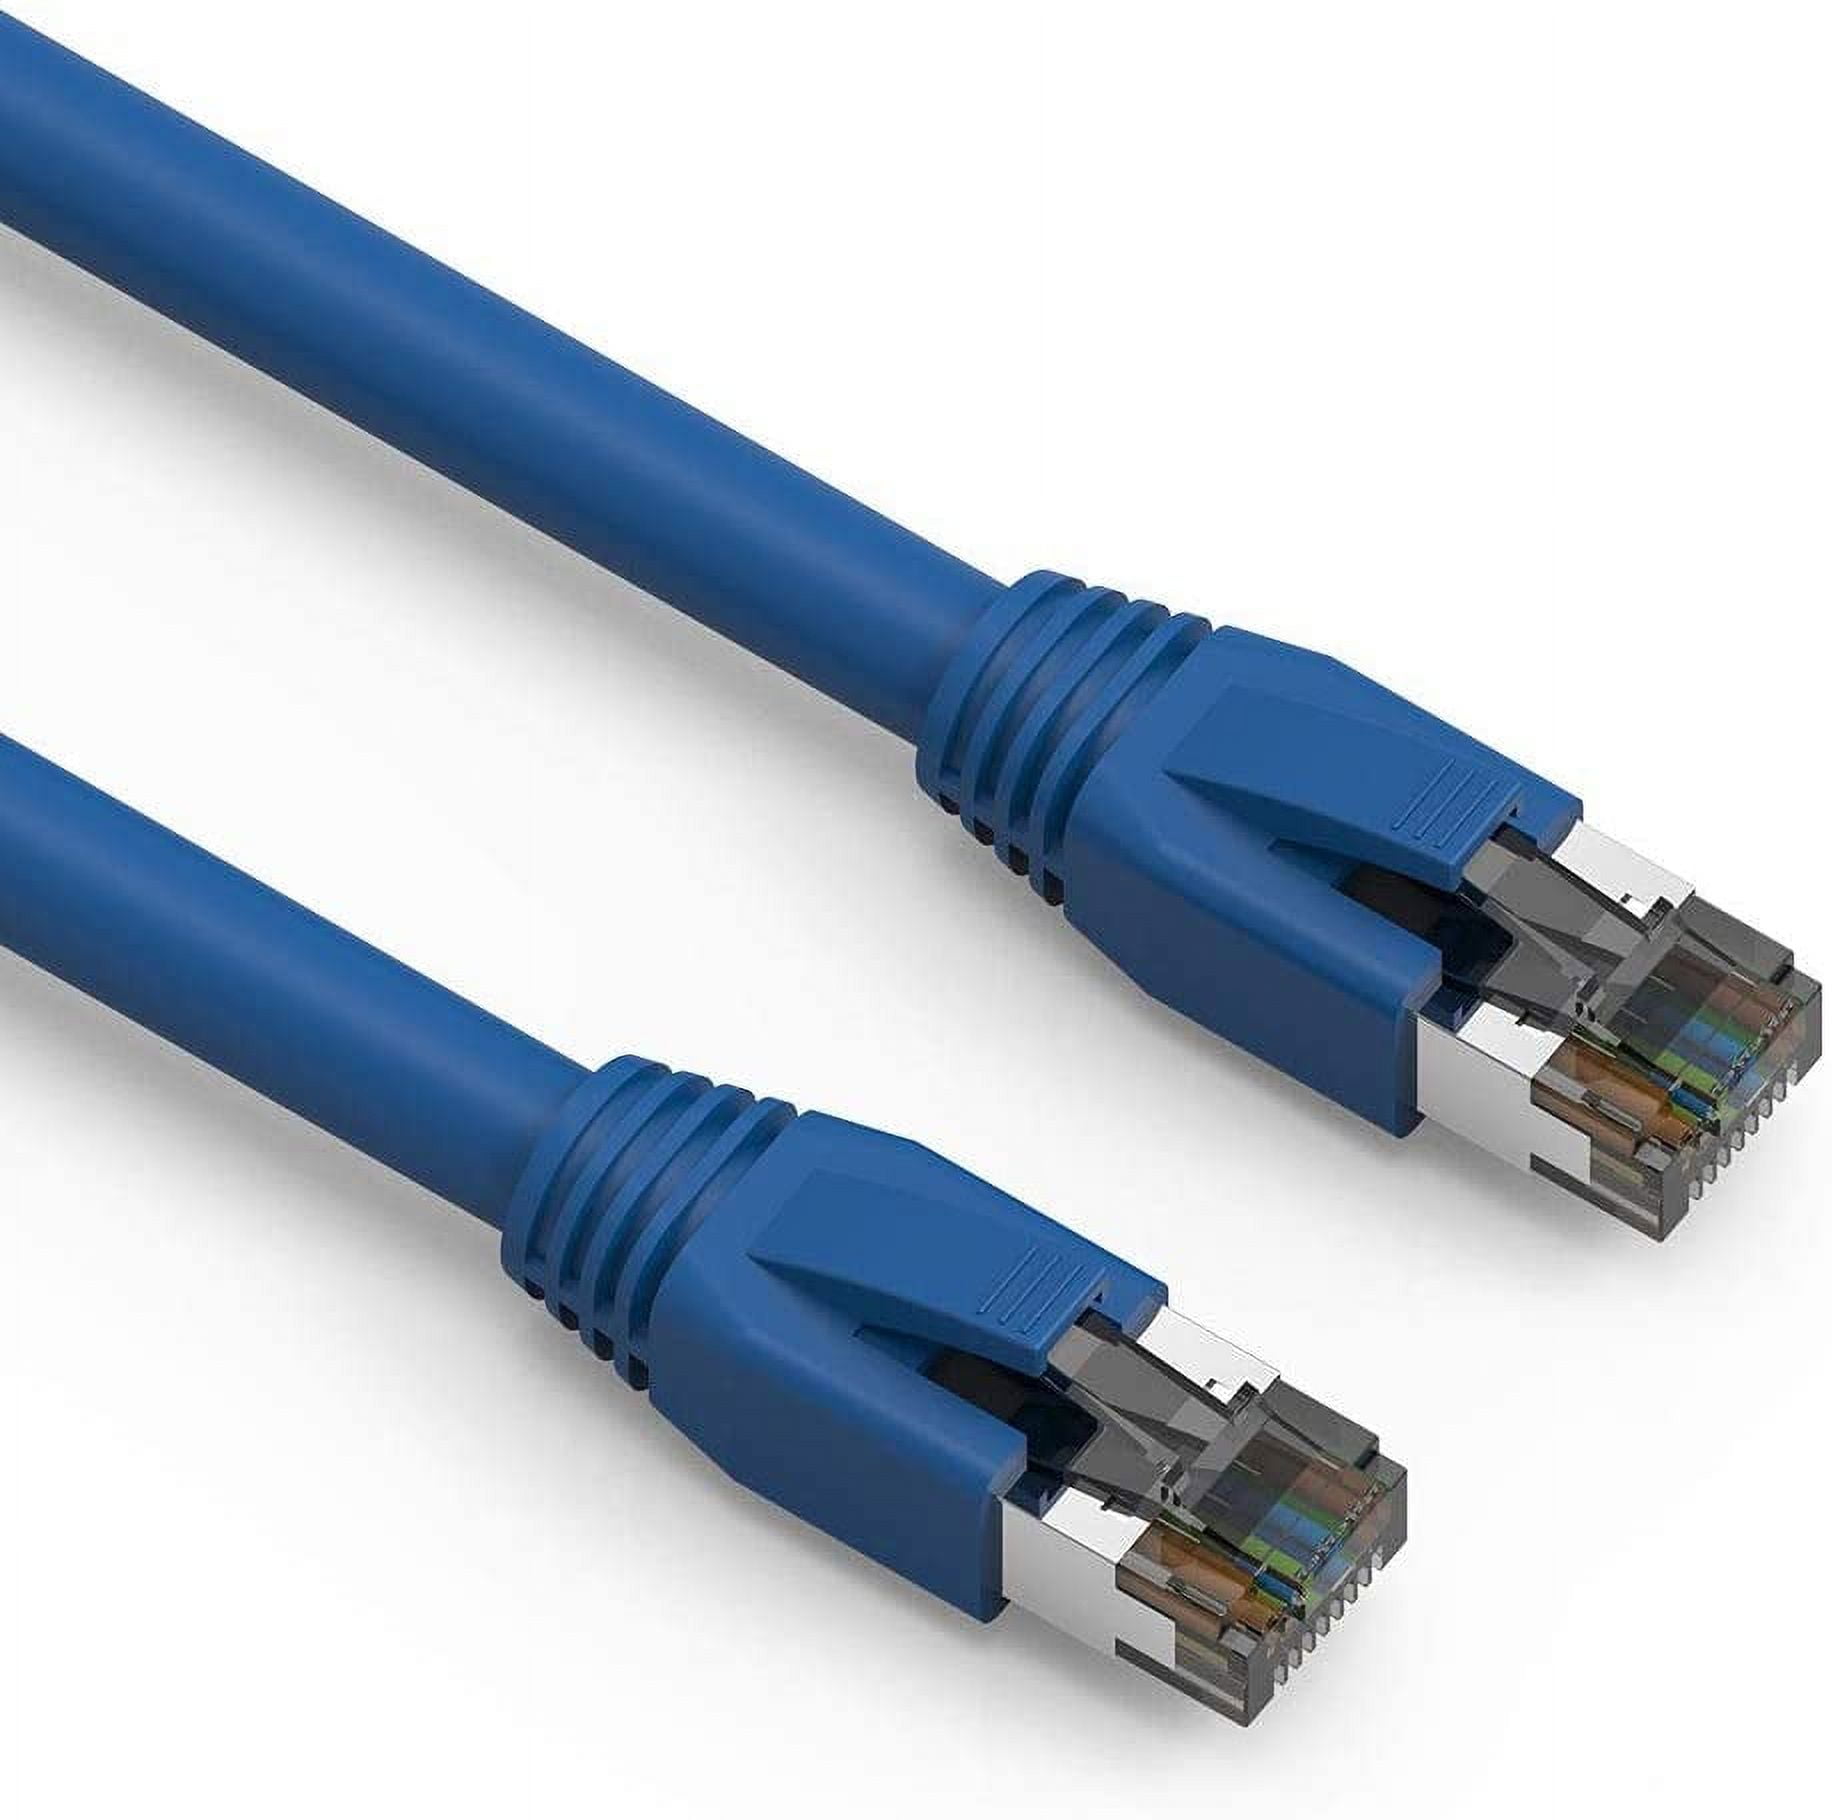 Cat 8 Ethernet Cable 35 ft Network Internet Cable, Flat LAN Cord Poe with  RJ45 Connector for Modems, Routers, Switches, Gaming, Network Adapters,  PS5, PS4, PC, Laptop, Desktop 